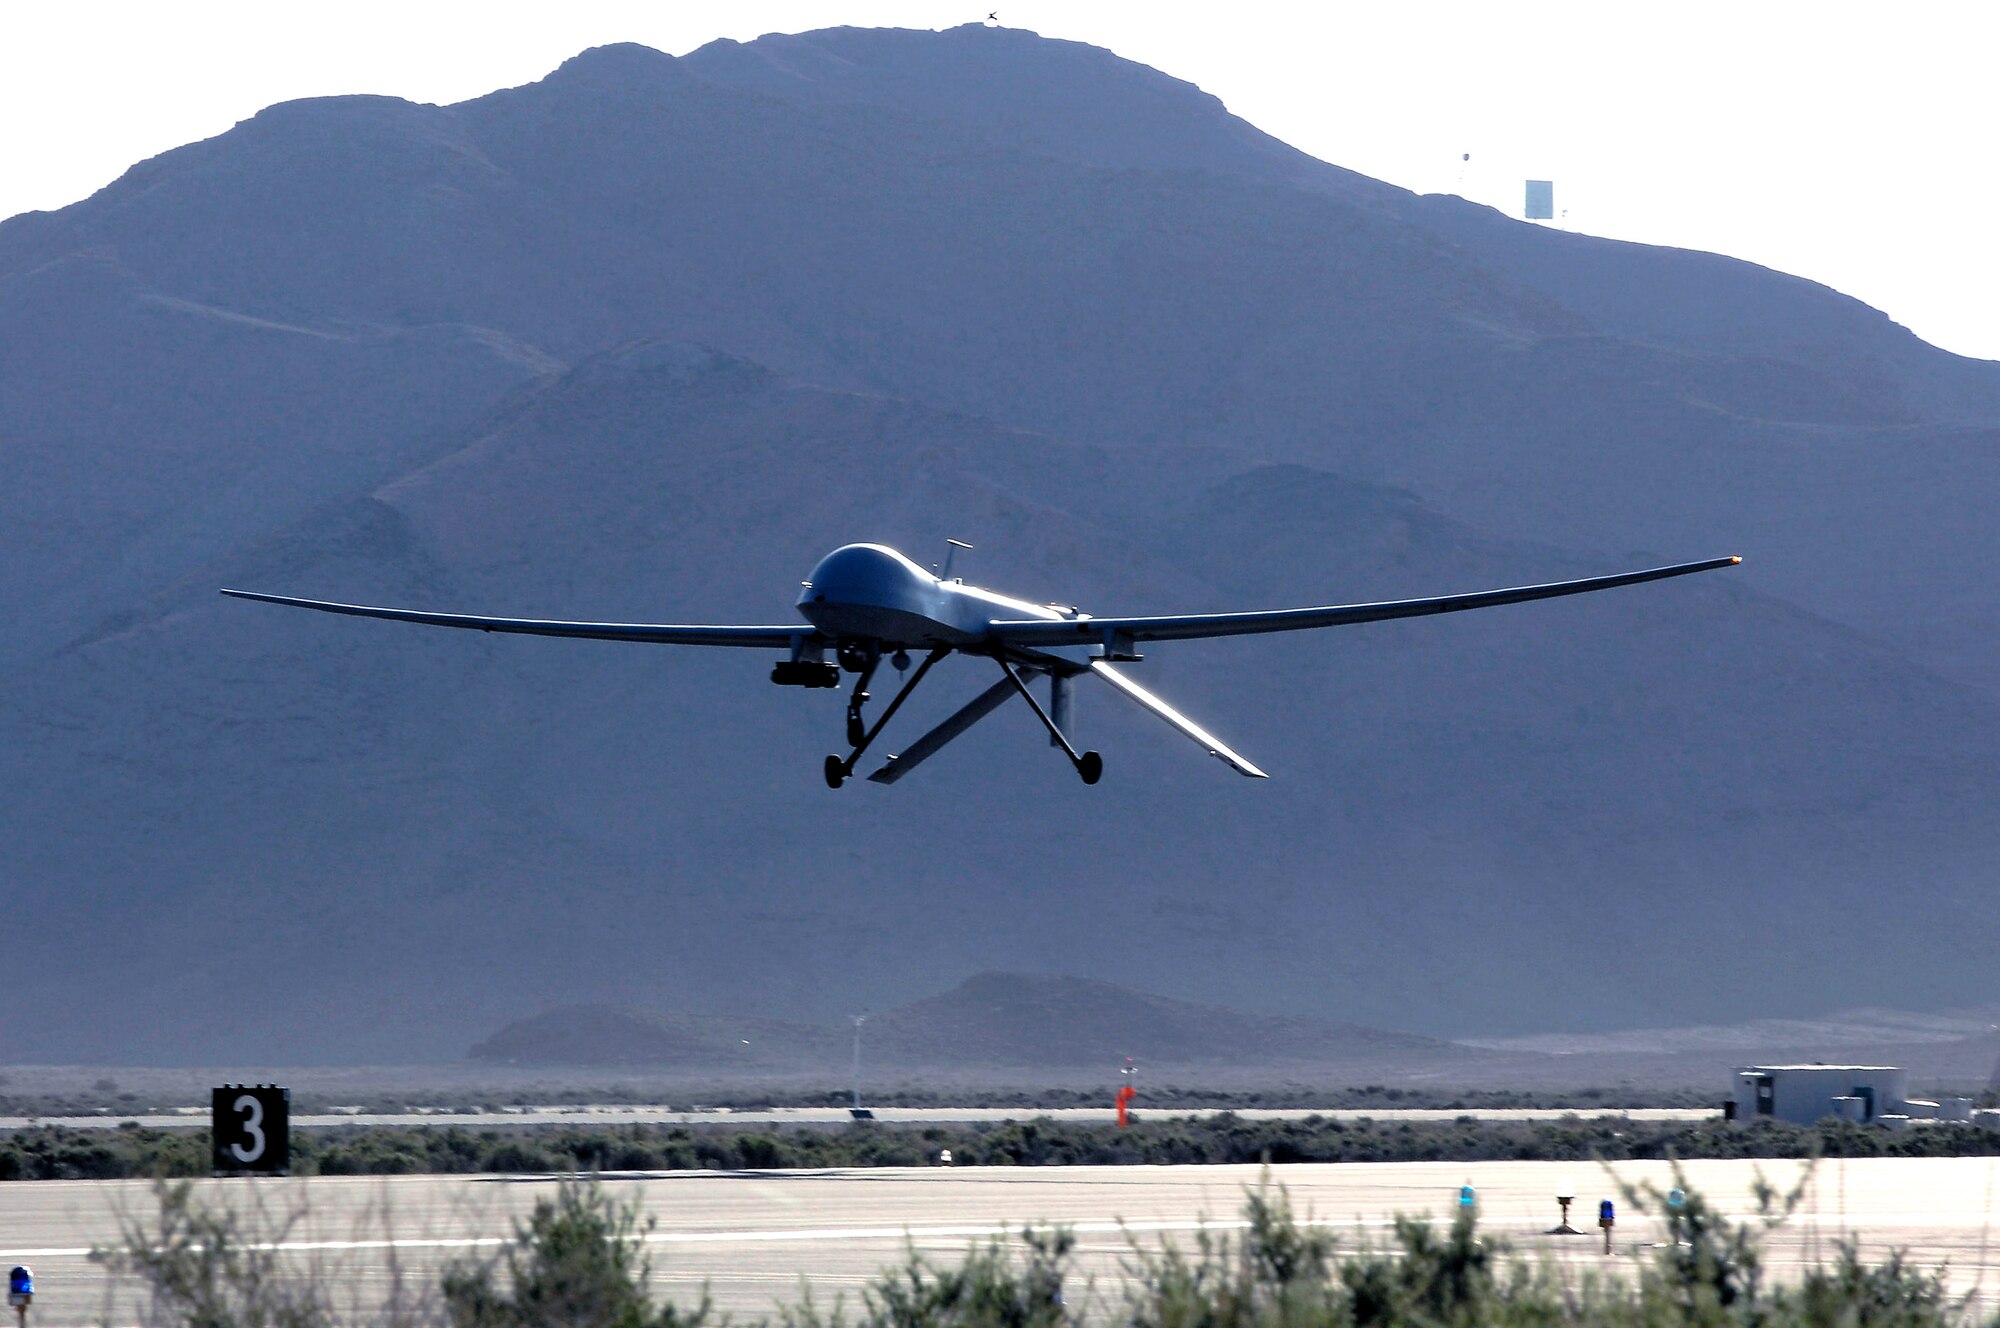 The primary mission of the MQ-1 Predator is interdiction and conducting armed reconnaissance against critical, perishable targets. When the MQ-1 is not actively pursuing its primary mission, it provides reconnaissance, surveillance and target acquisition in support of the Joint Forces commander.  (U.S. Air Force photo/Staff Sgt. Brian Ferguson)